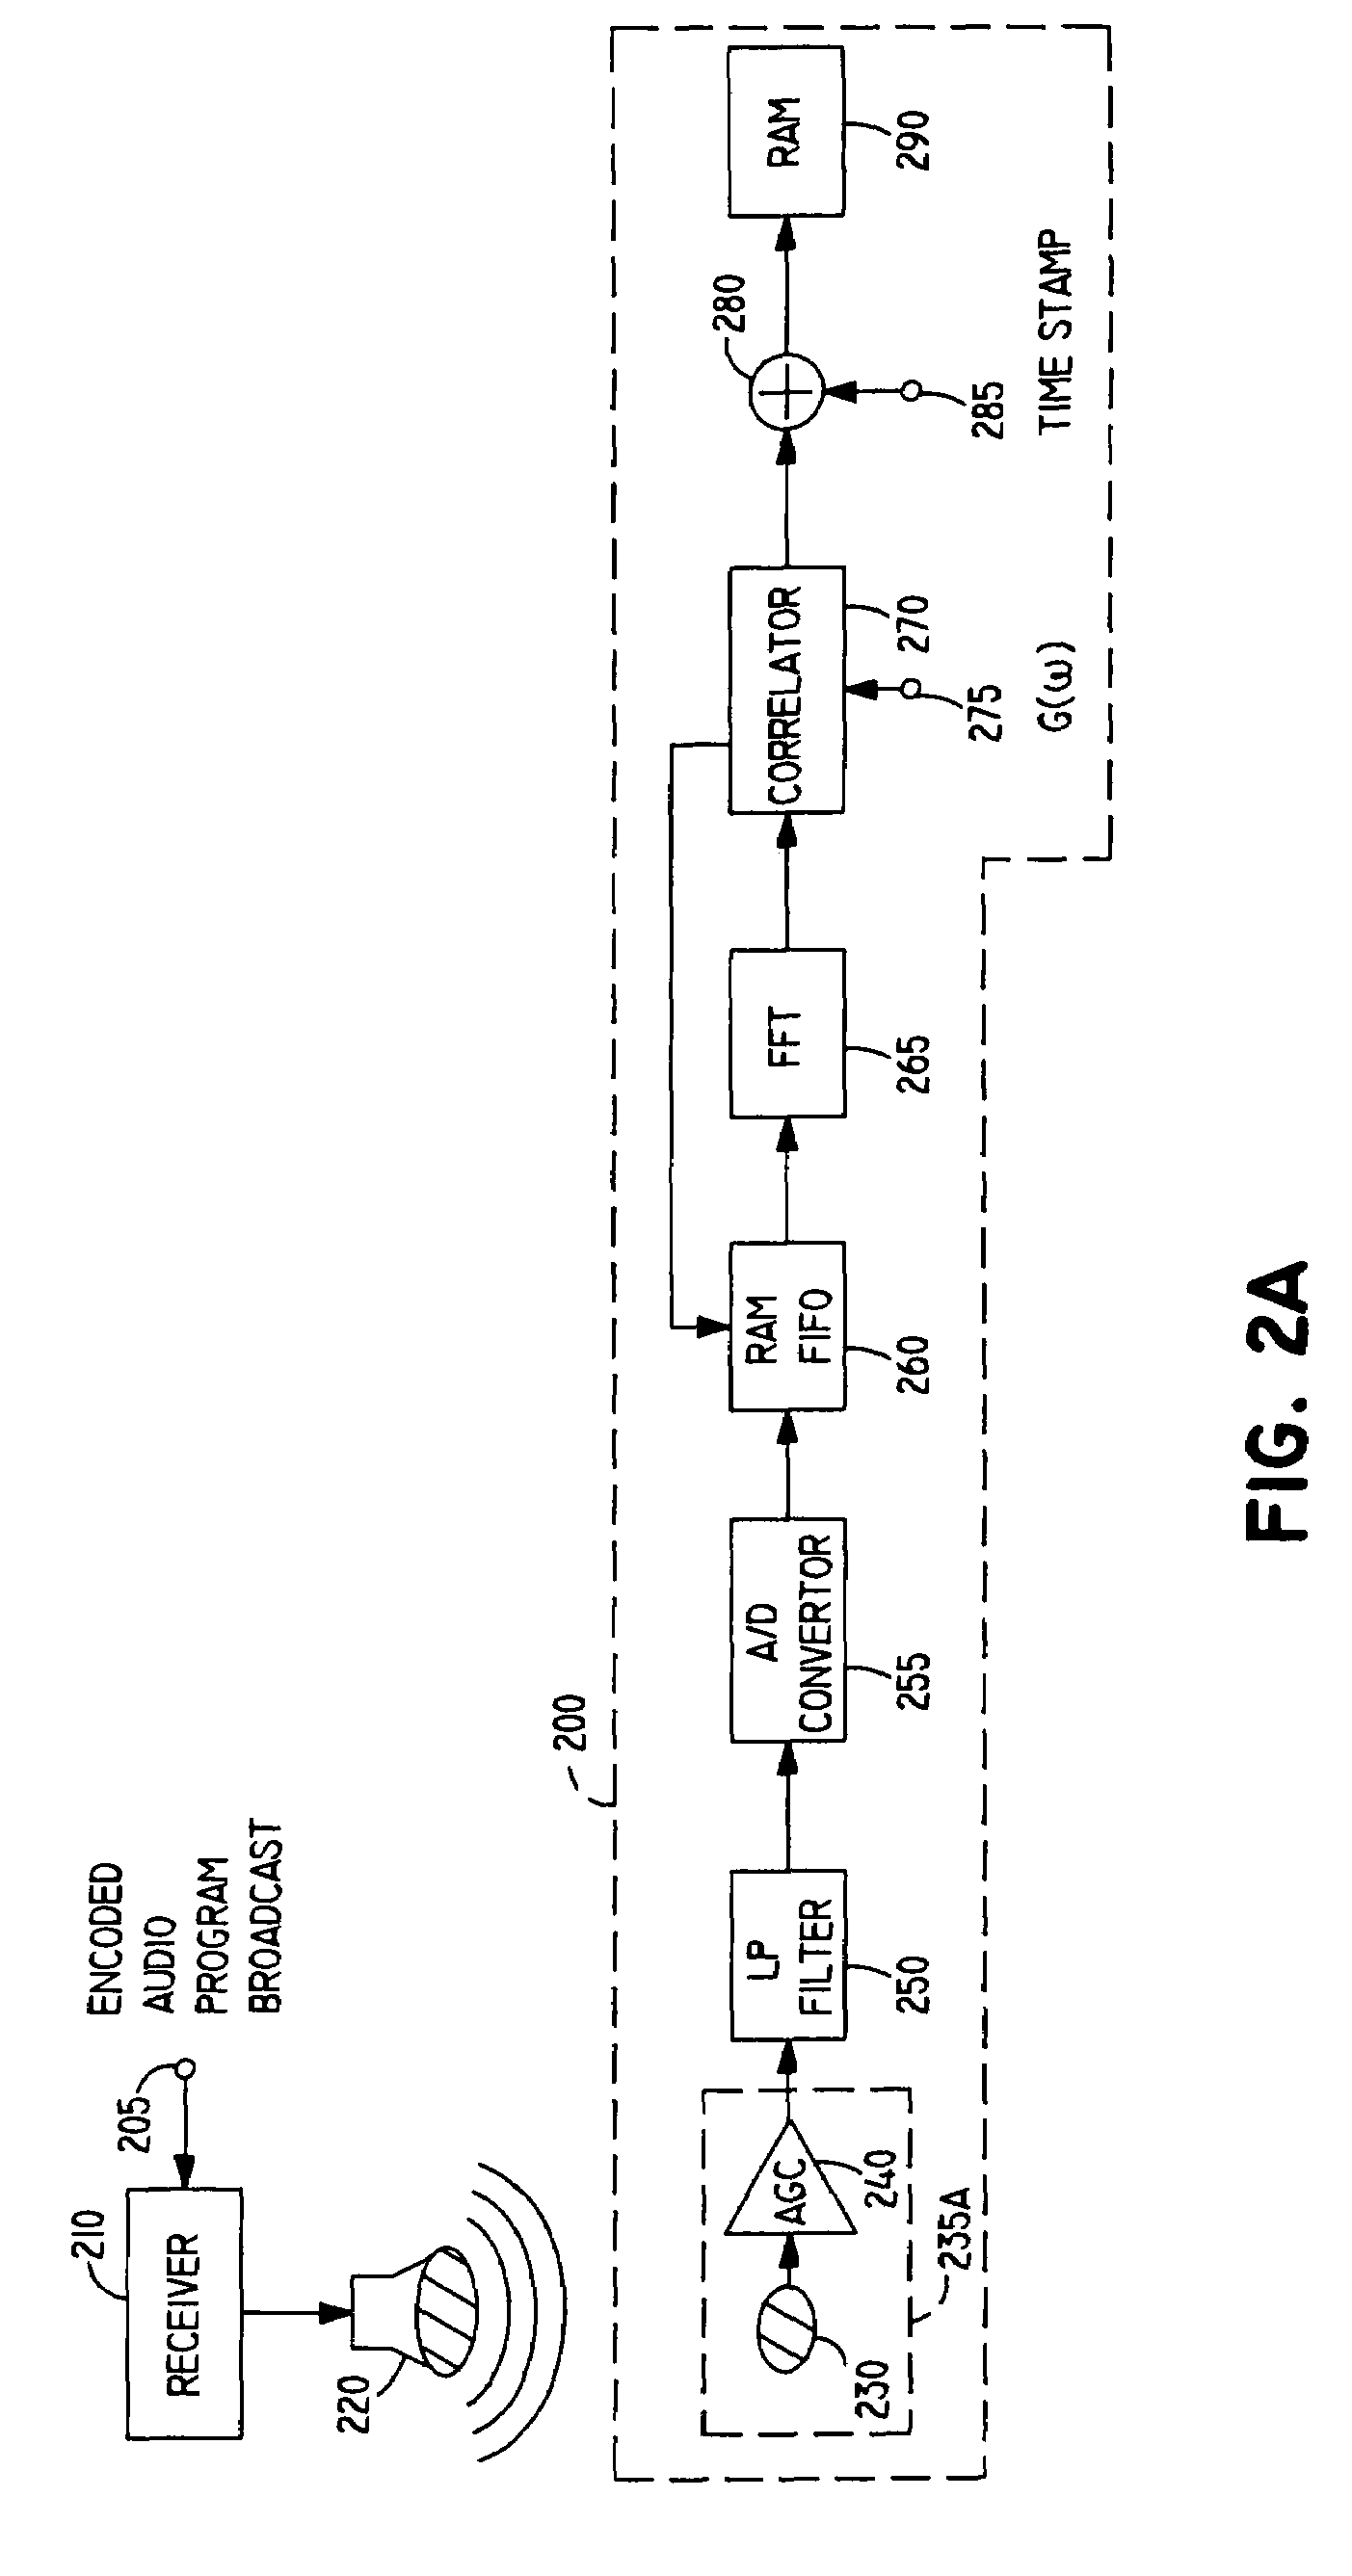 Method and apparatus for encoding/decoding broadcast or recorded segments and monitoring audience exposure thereto